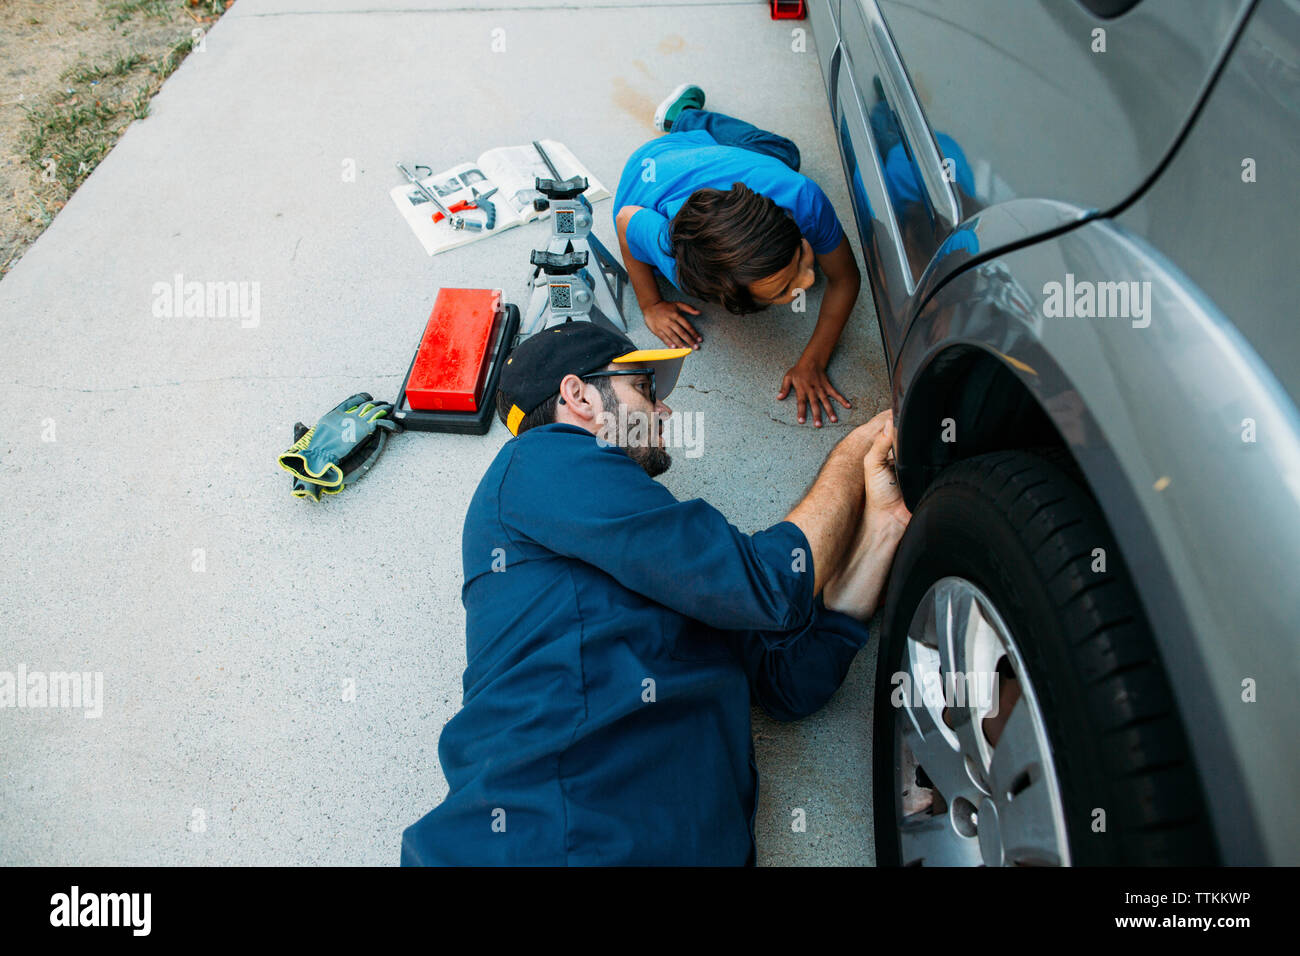 High angle view of father teaching son to repair car at driveway Stock Photo